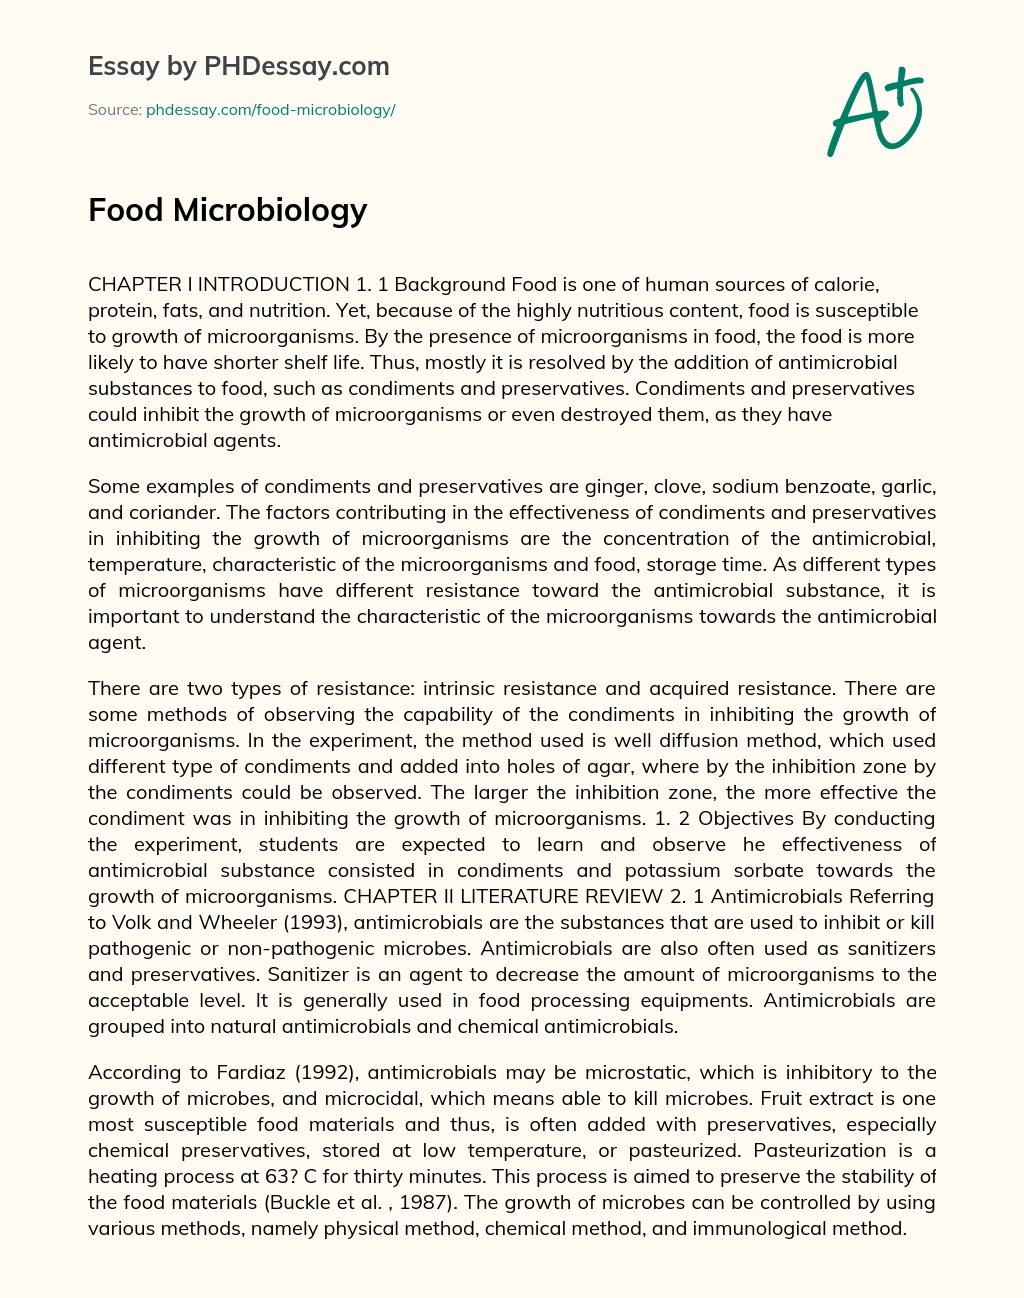 food microbiology essay questions